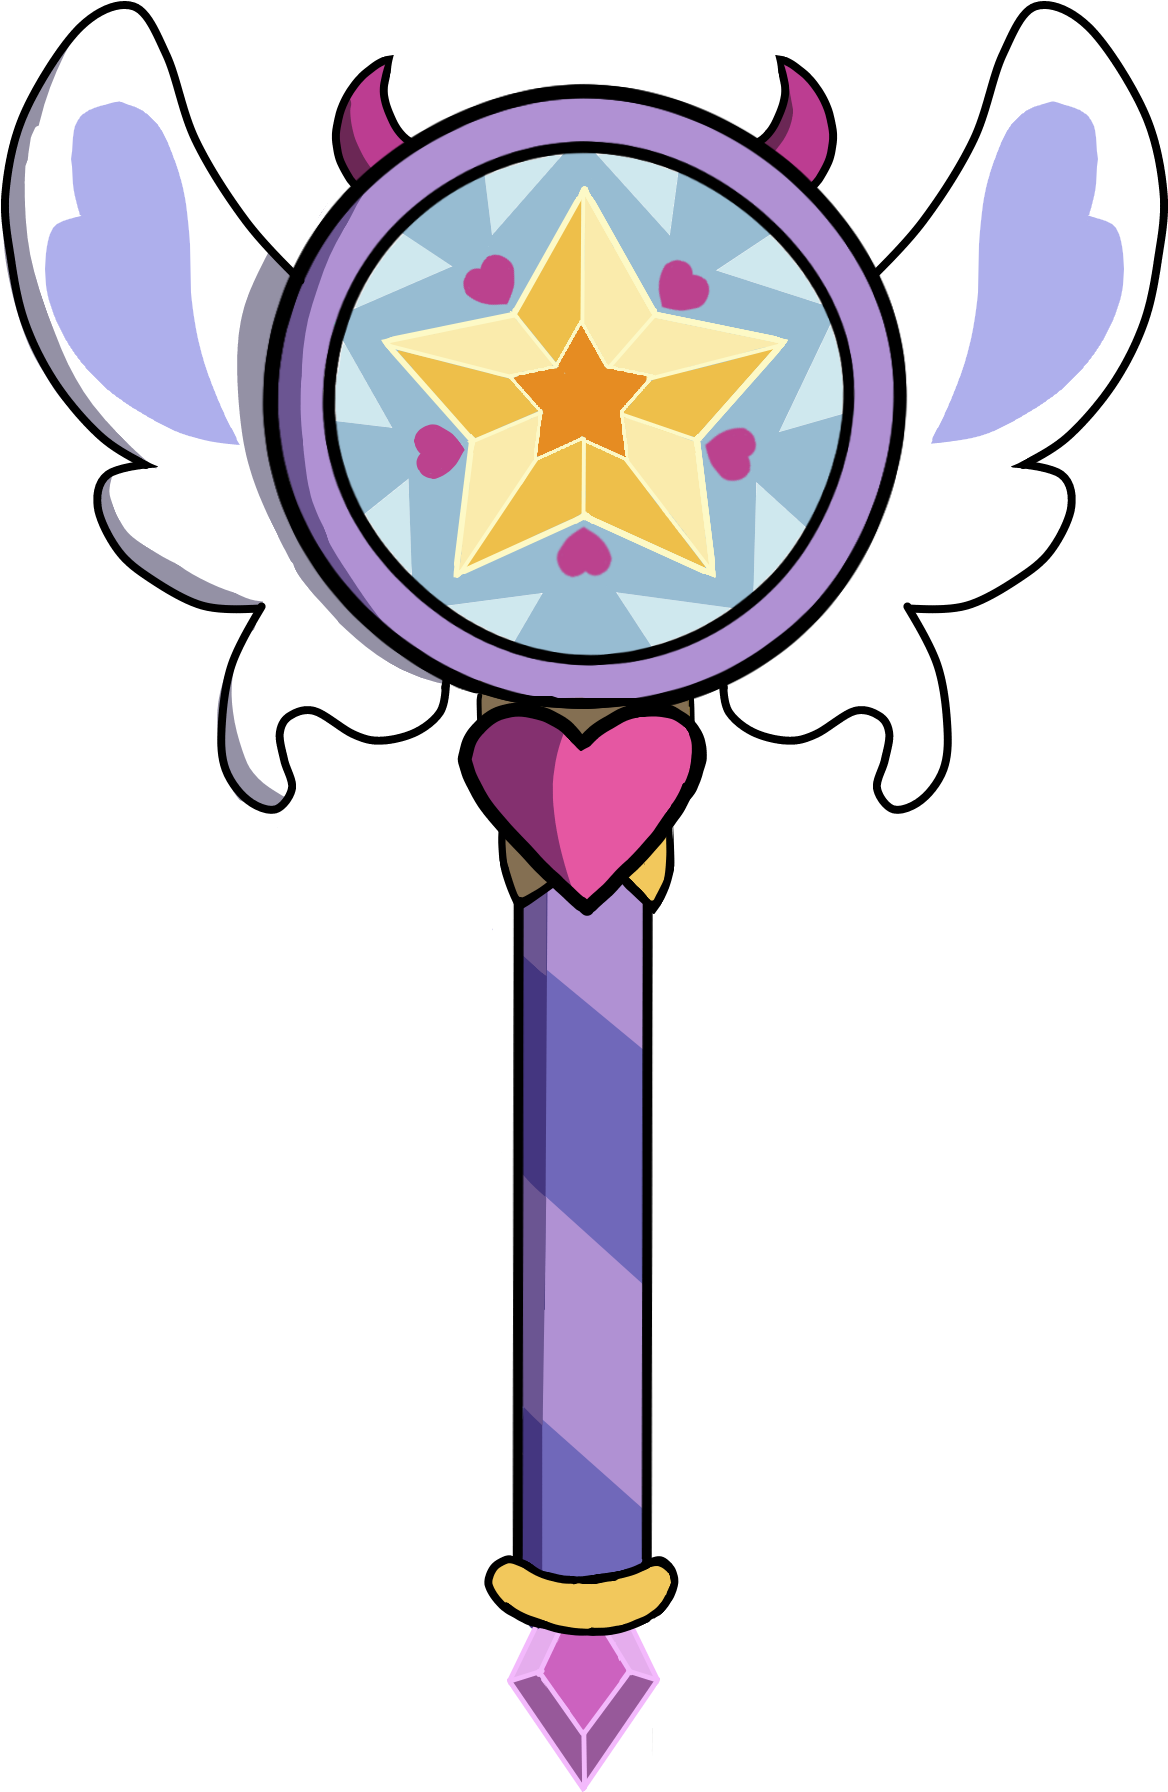 Starco, Star Butterfly, Magical Girl, Magic Wands, - Star Vs The Forces Of Evil New Wand (1187x1837)